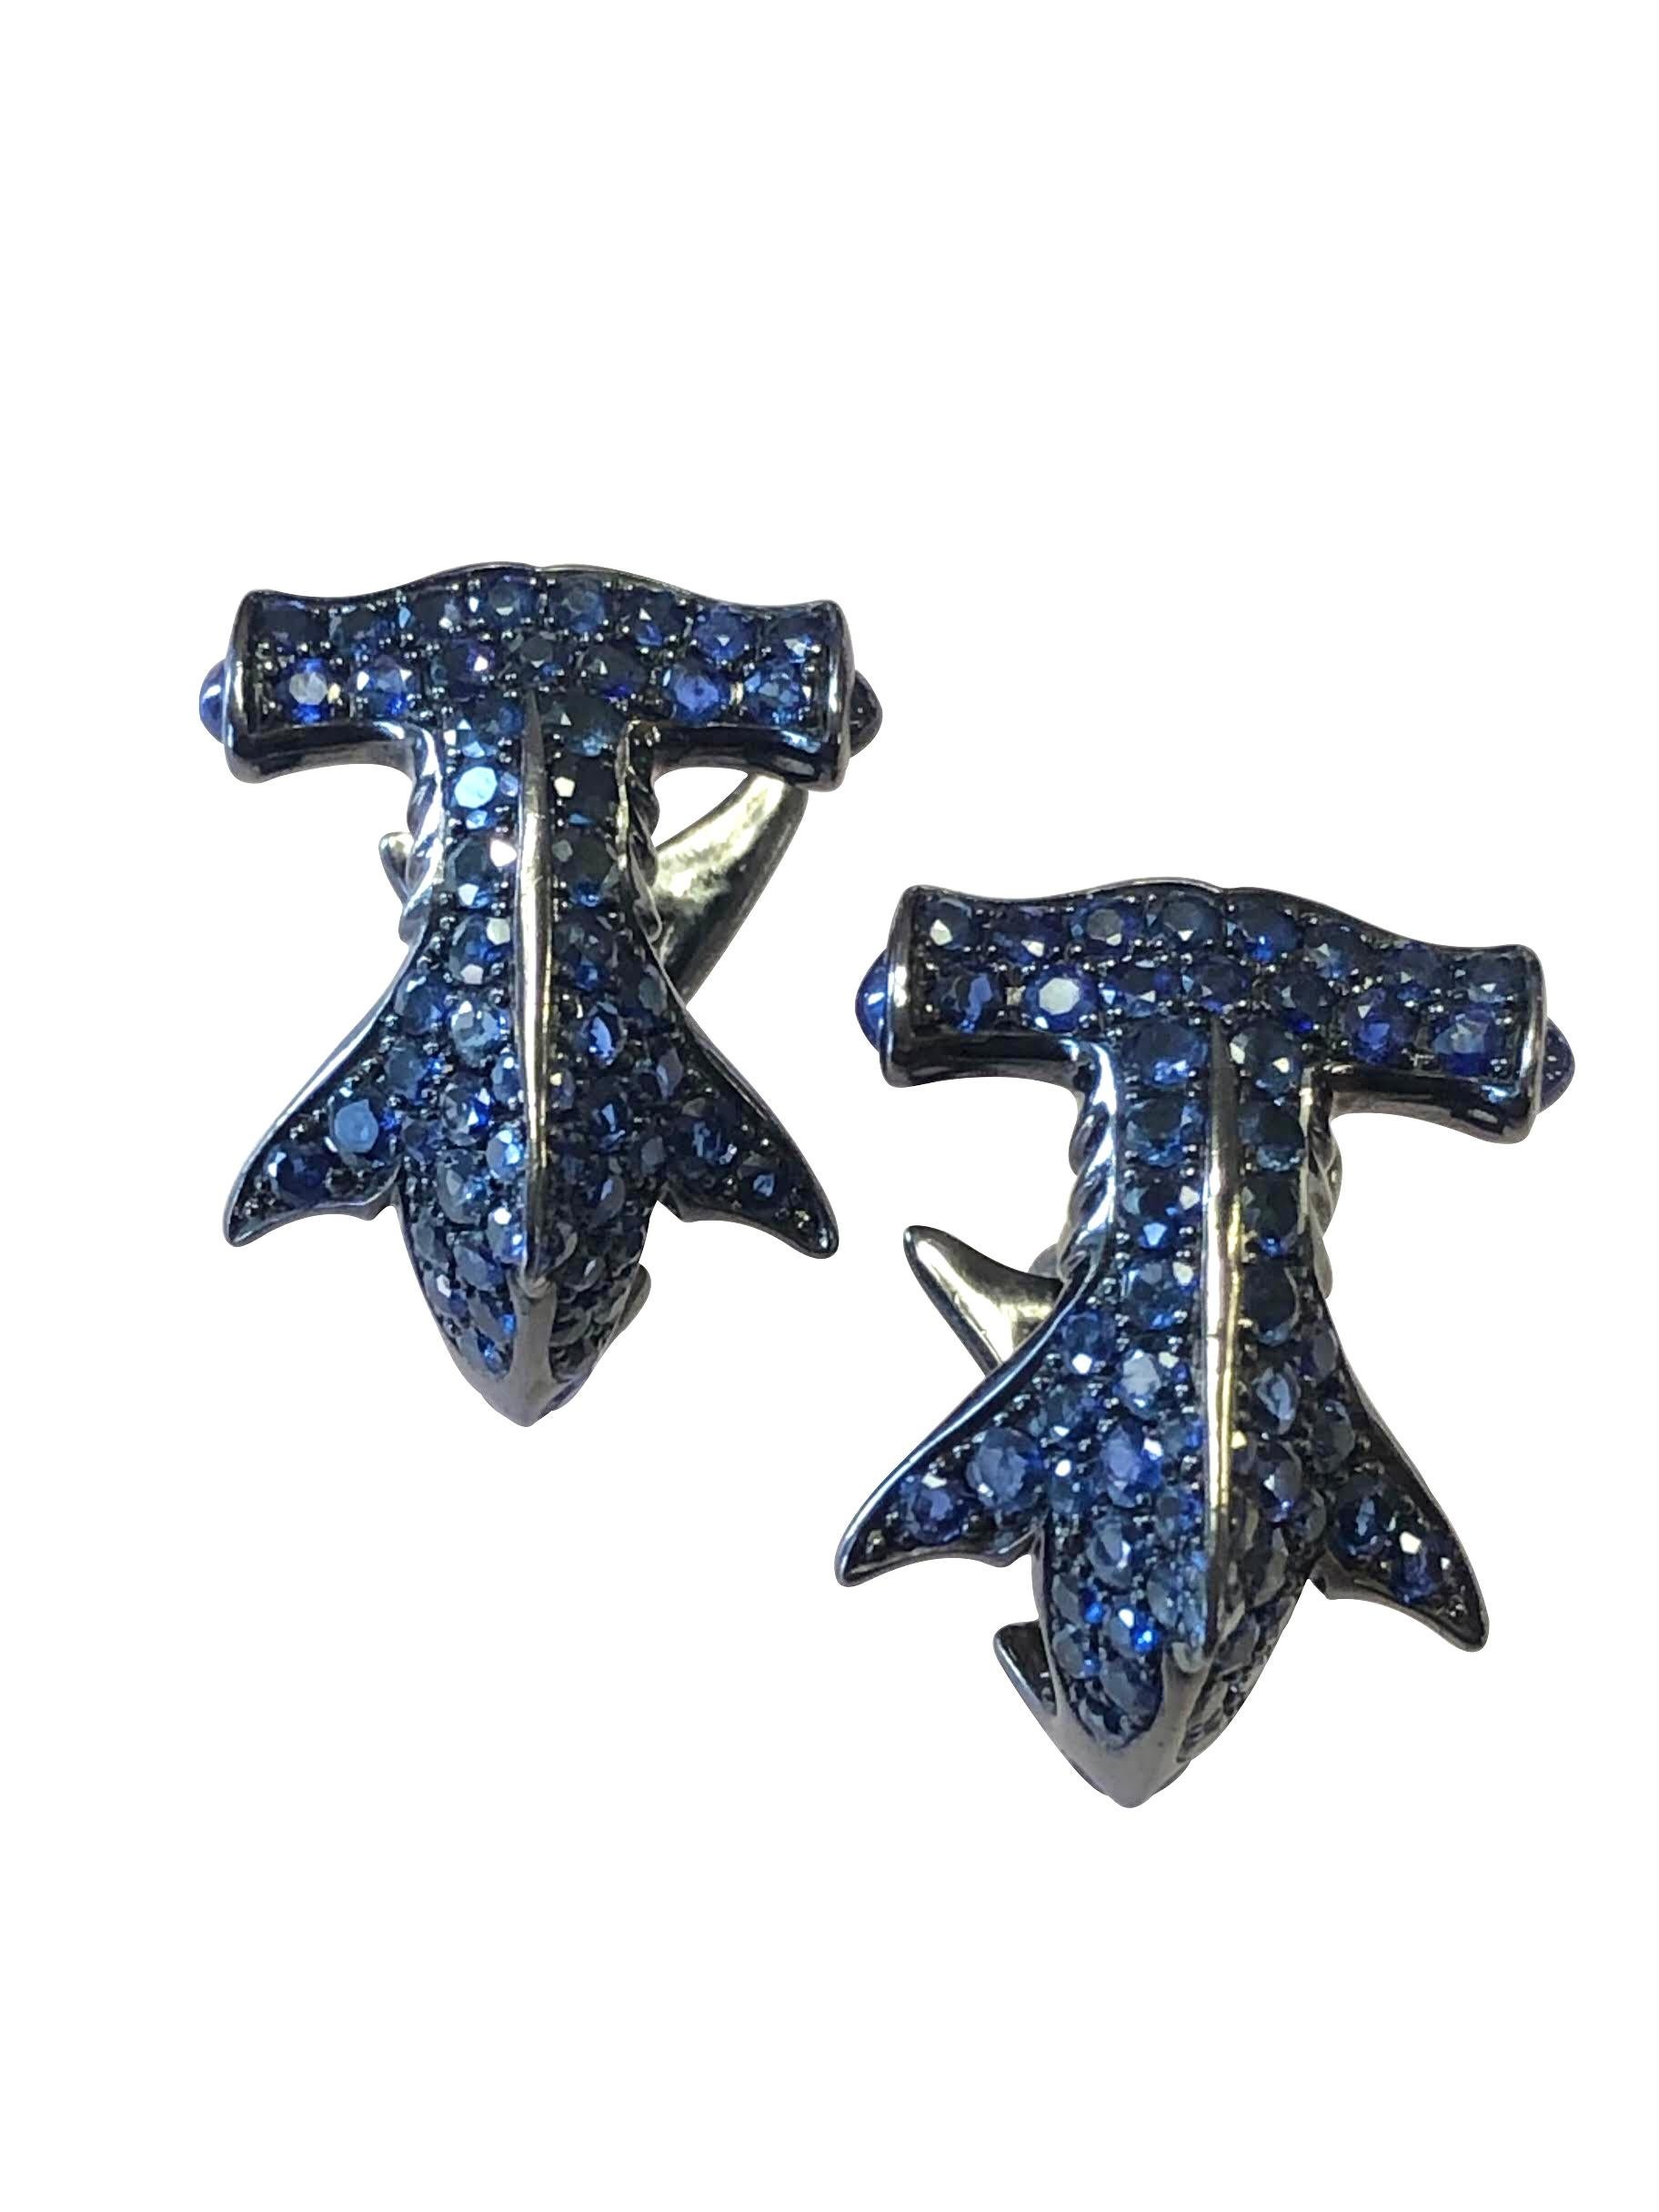 Circa 2018 Stephen Webster No regrets Collection Hammerhead Shark Cufflinks. Black Rhodium over Sterling Silver and set with Sapphires totaling 5 Carats. Measuring 1 inch X 3/4 inch